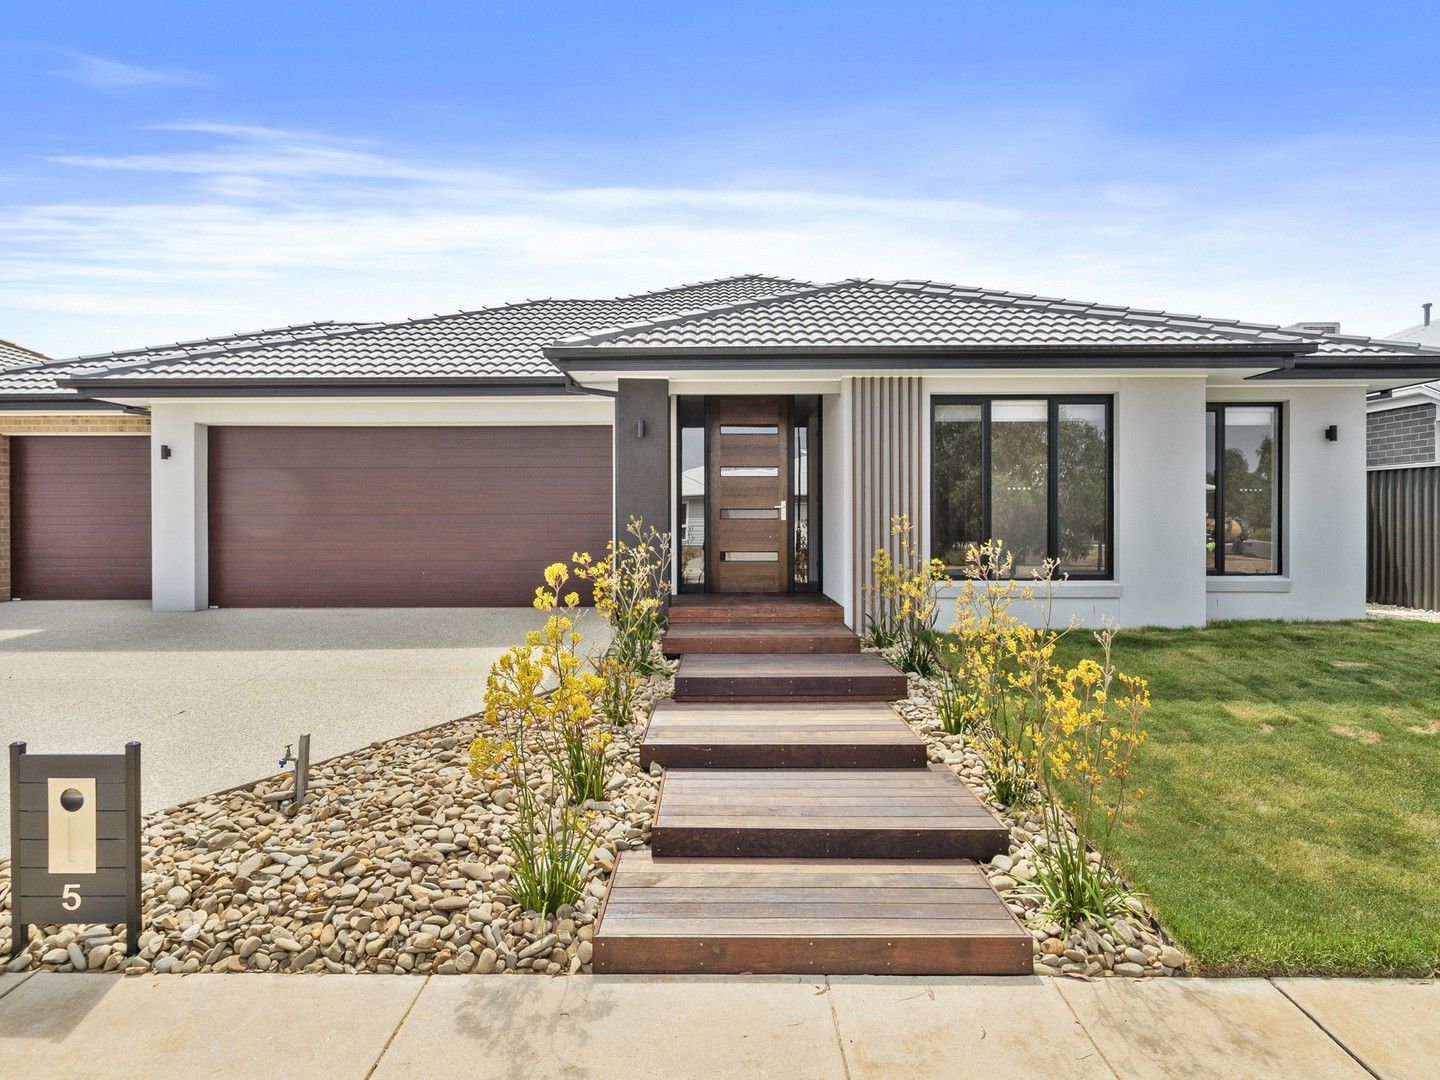 4 bedrooms House in 5 Oasis Crescent YARRAWONGA VIC, 3730